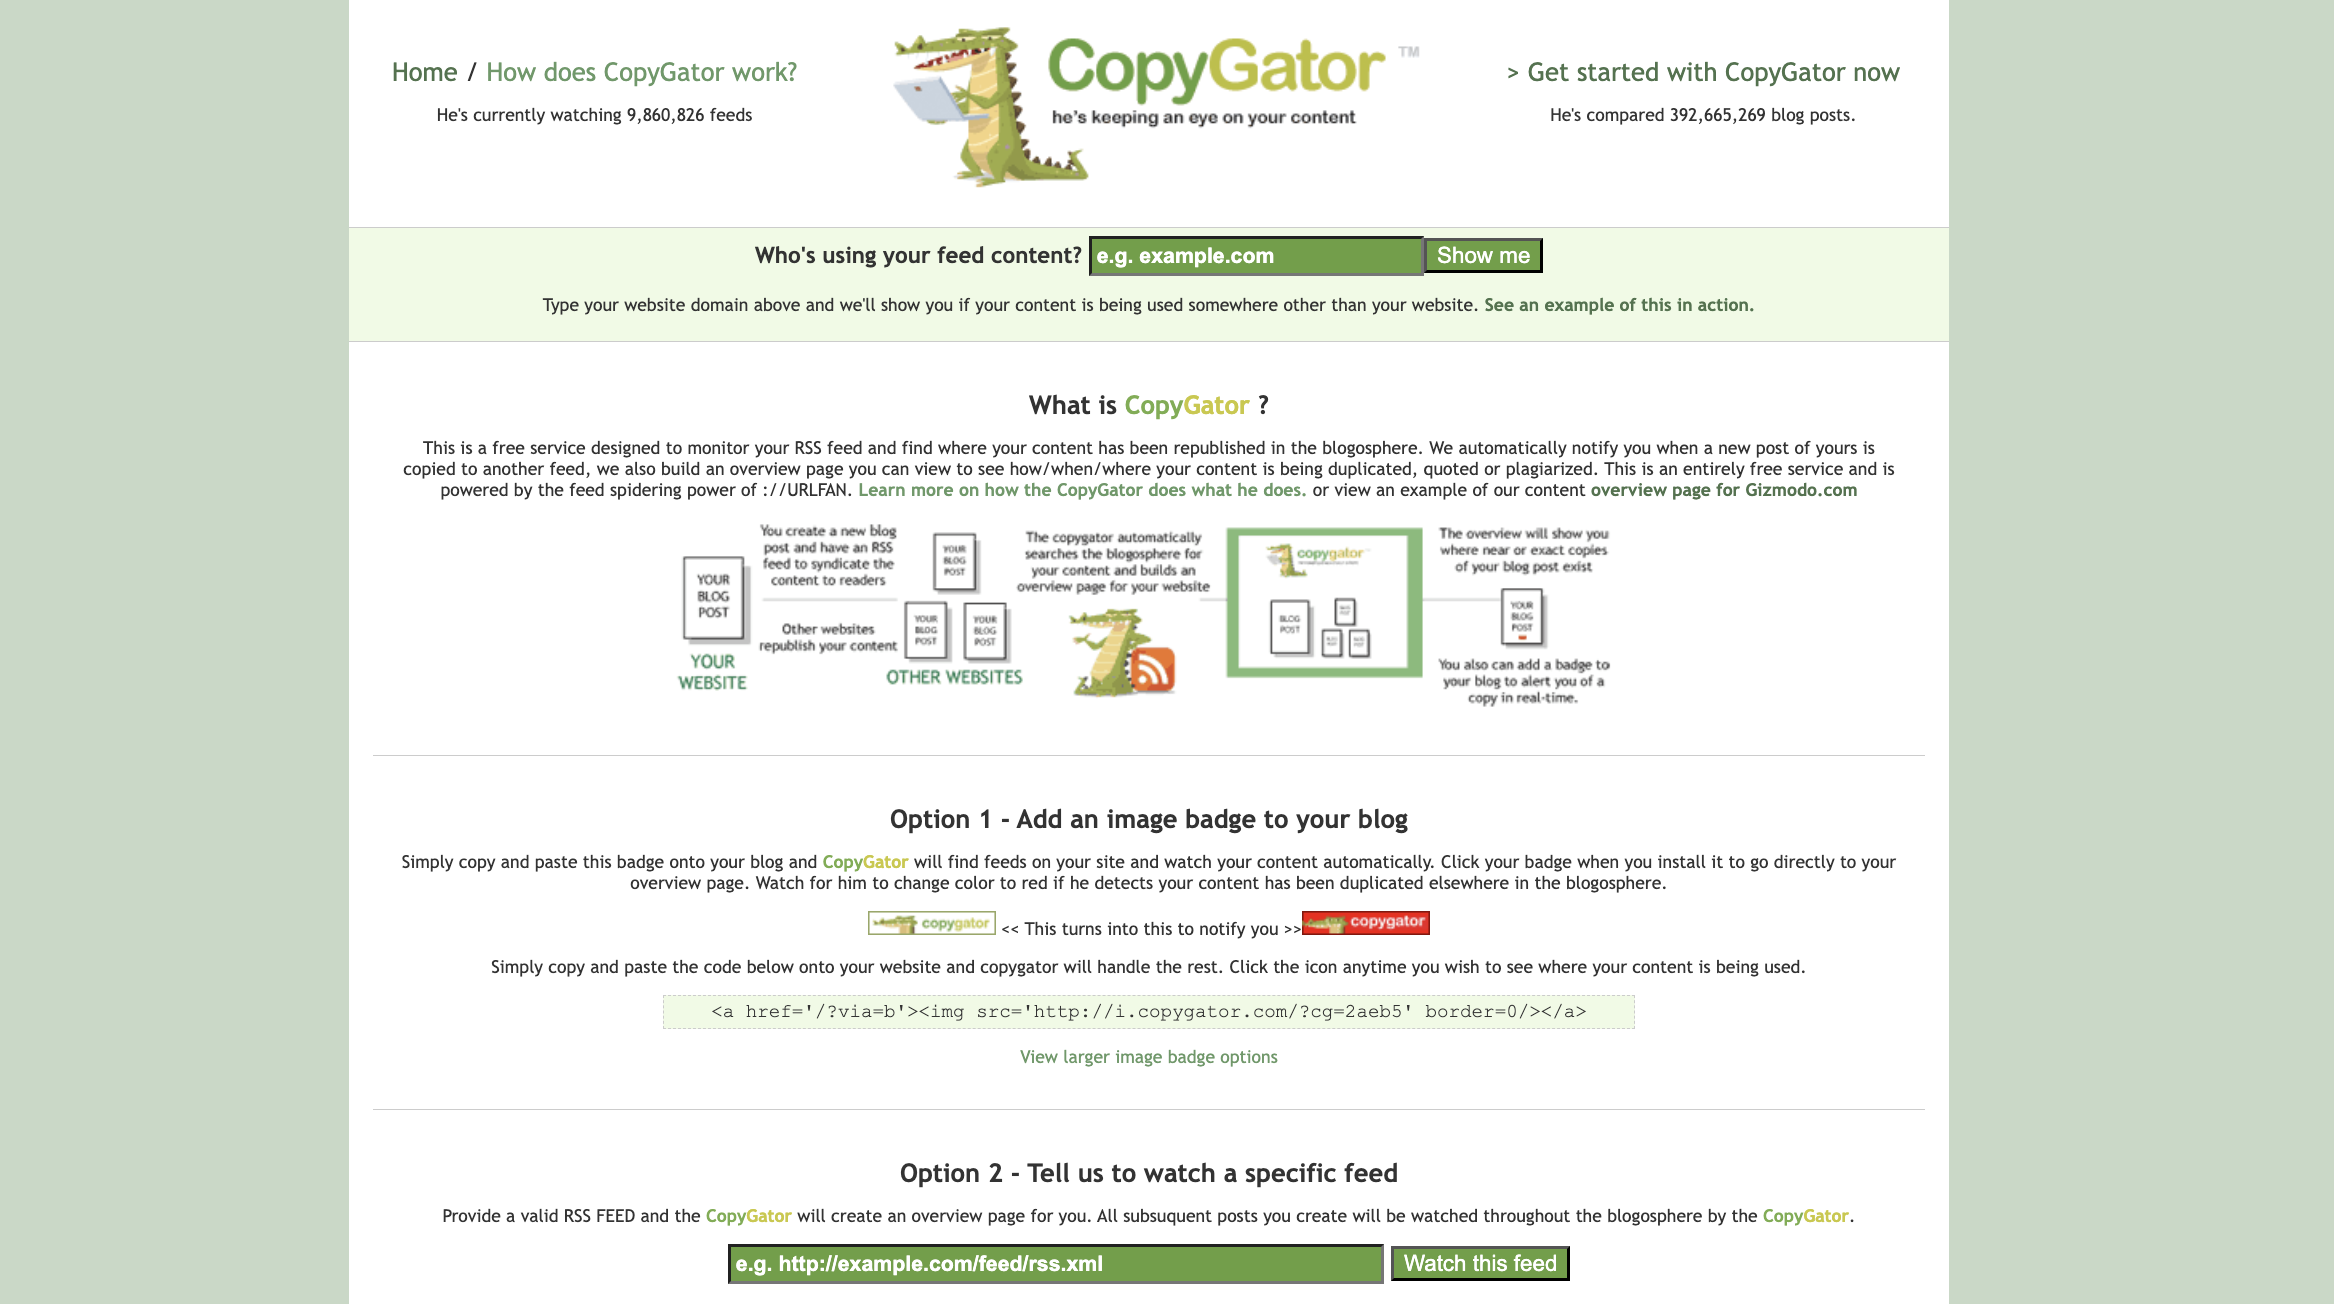 Screenshot of CopyGator website explaining how it helps monitor and track content feeds.